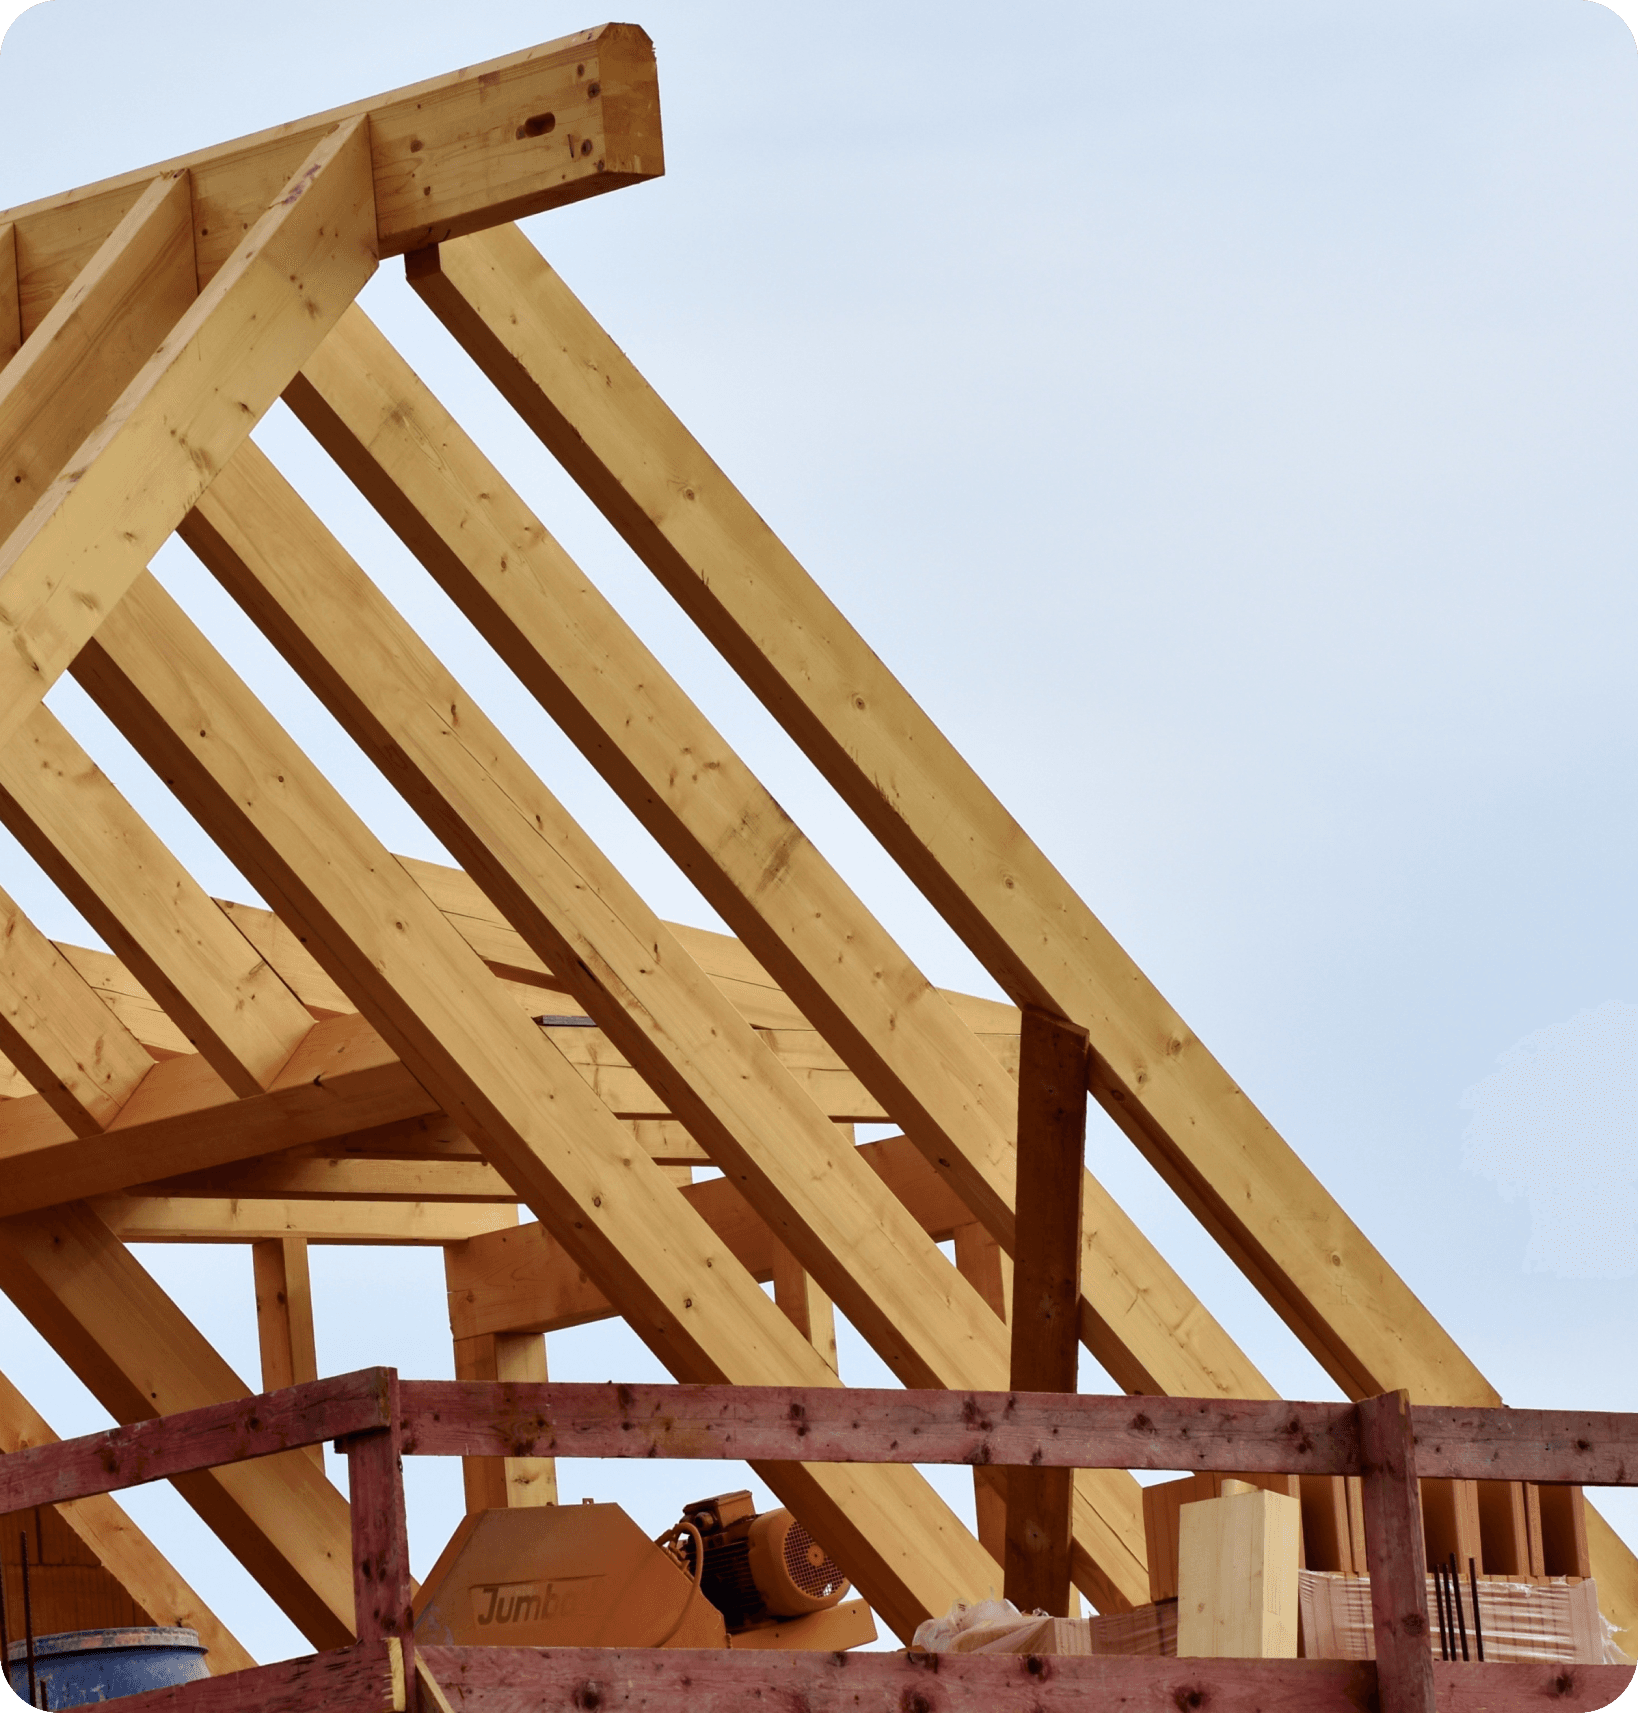 A picture of a timber based house in construction. The picture shows the roof of the house and the wooden beams that support it.